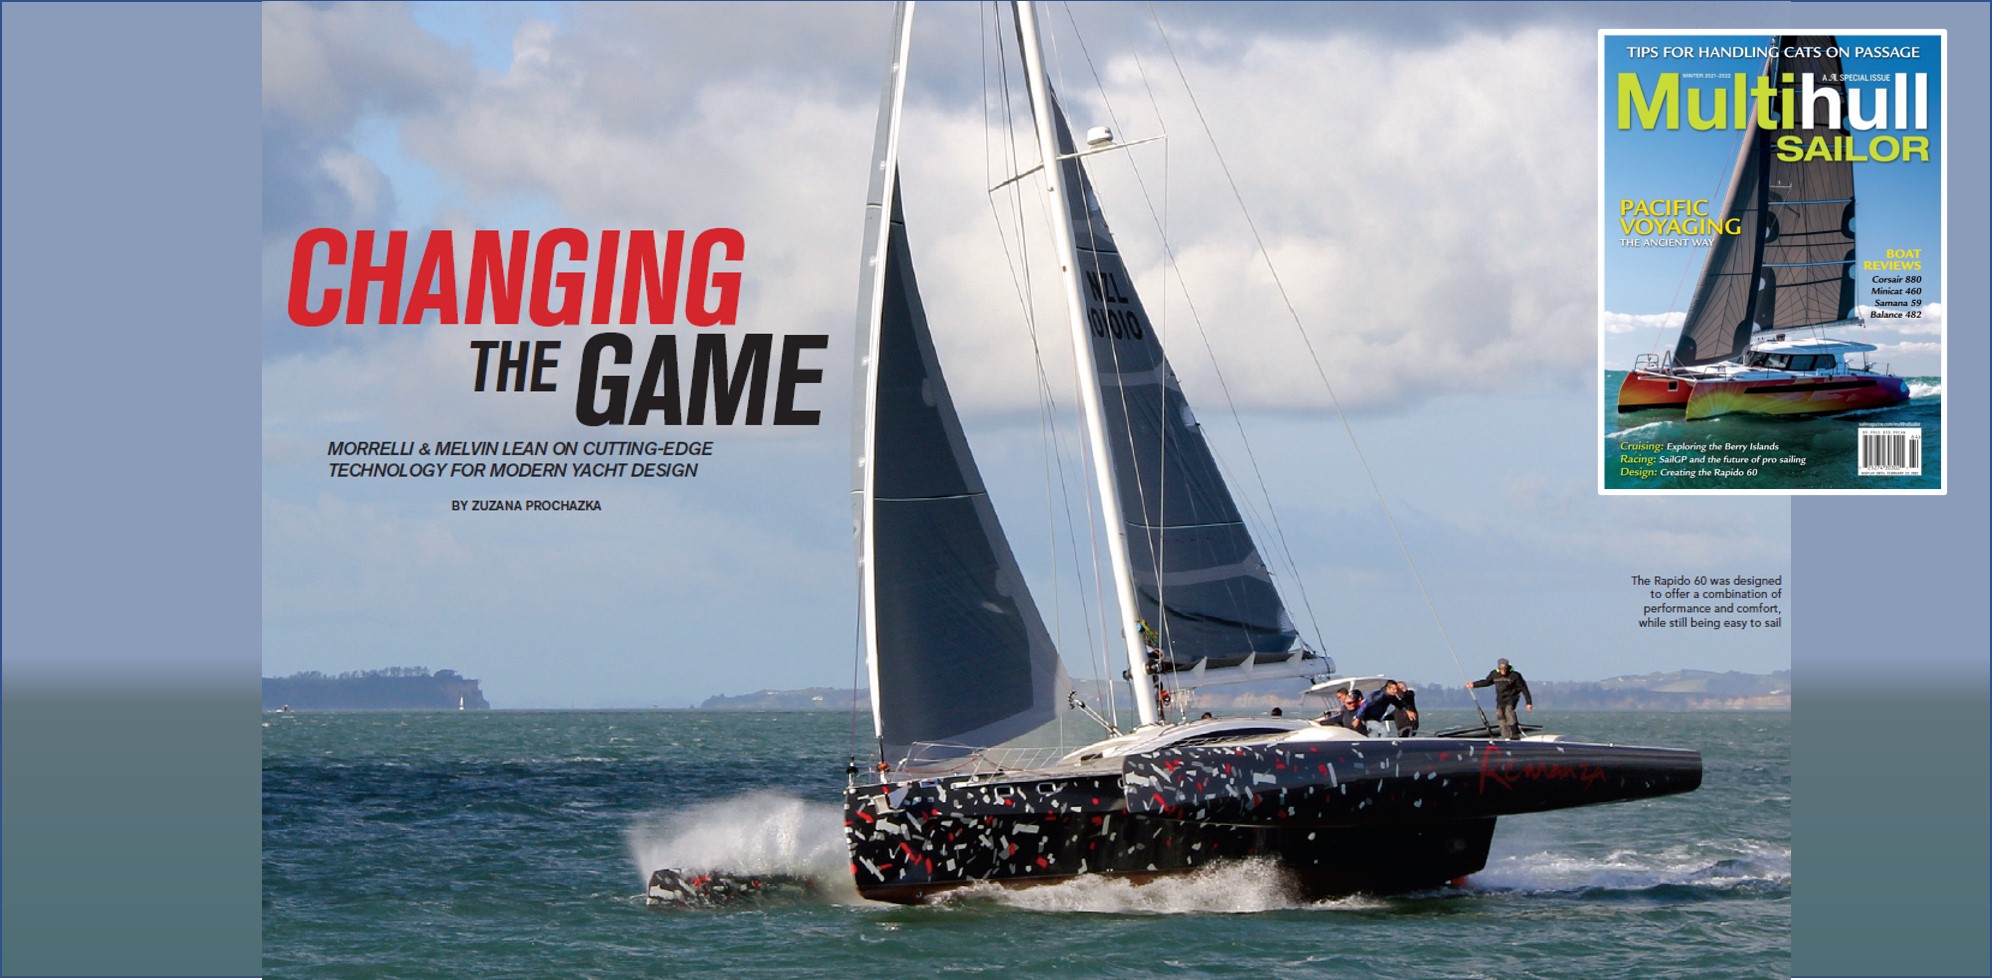 Rapido Changing the Game, reports Multihull Sailor, December 2021